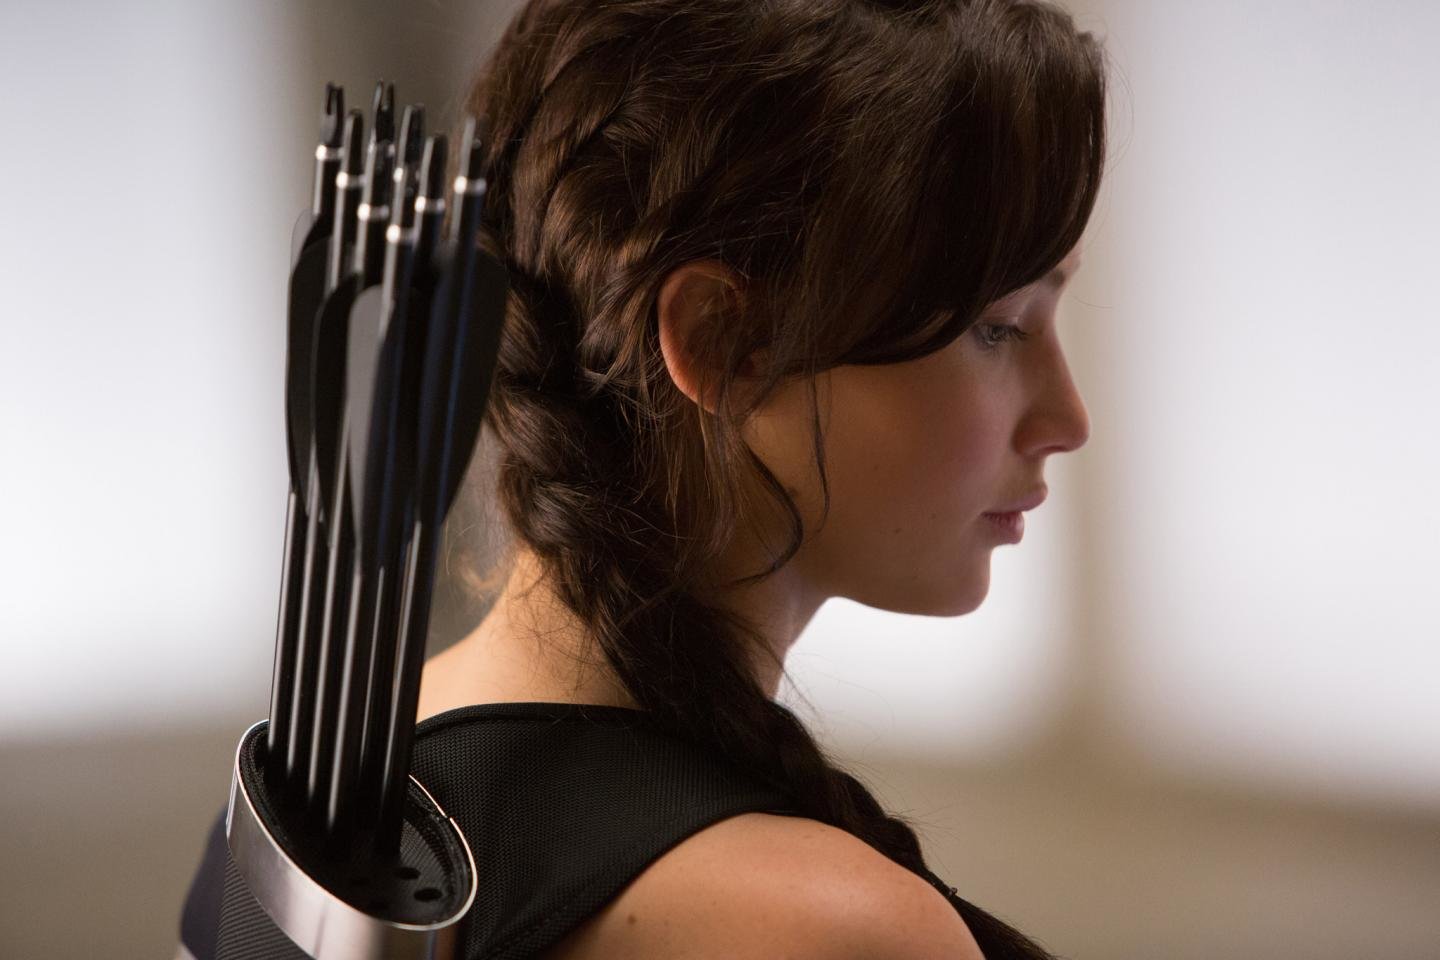 Best The Hunger Games wallpaper ID:316200 for High Resolution hd 1440x960 computer